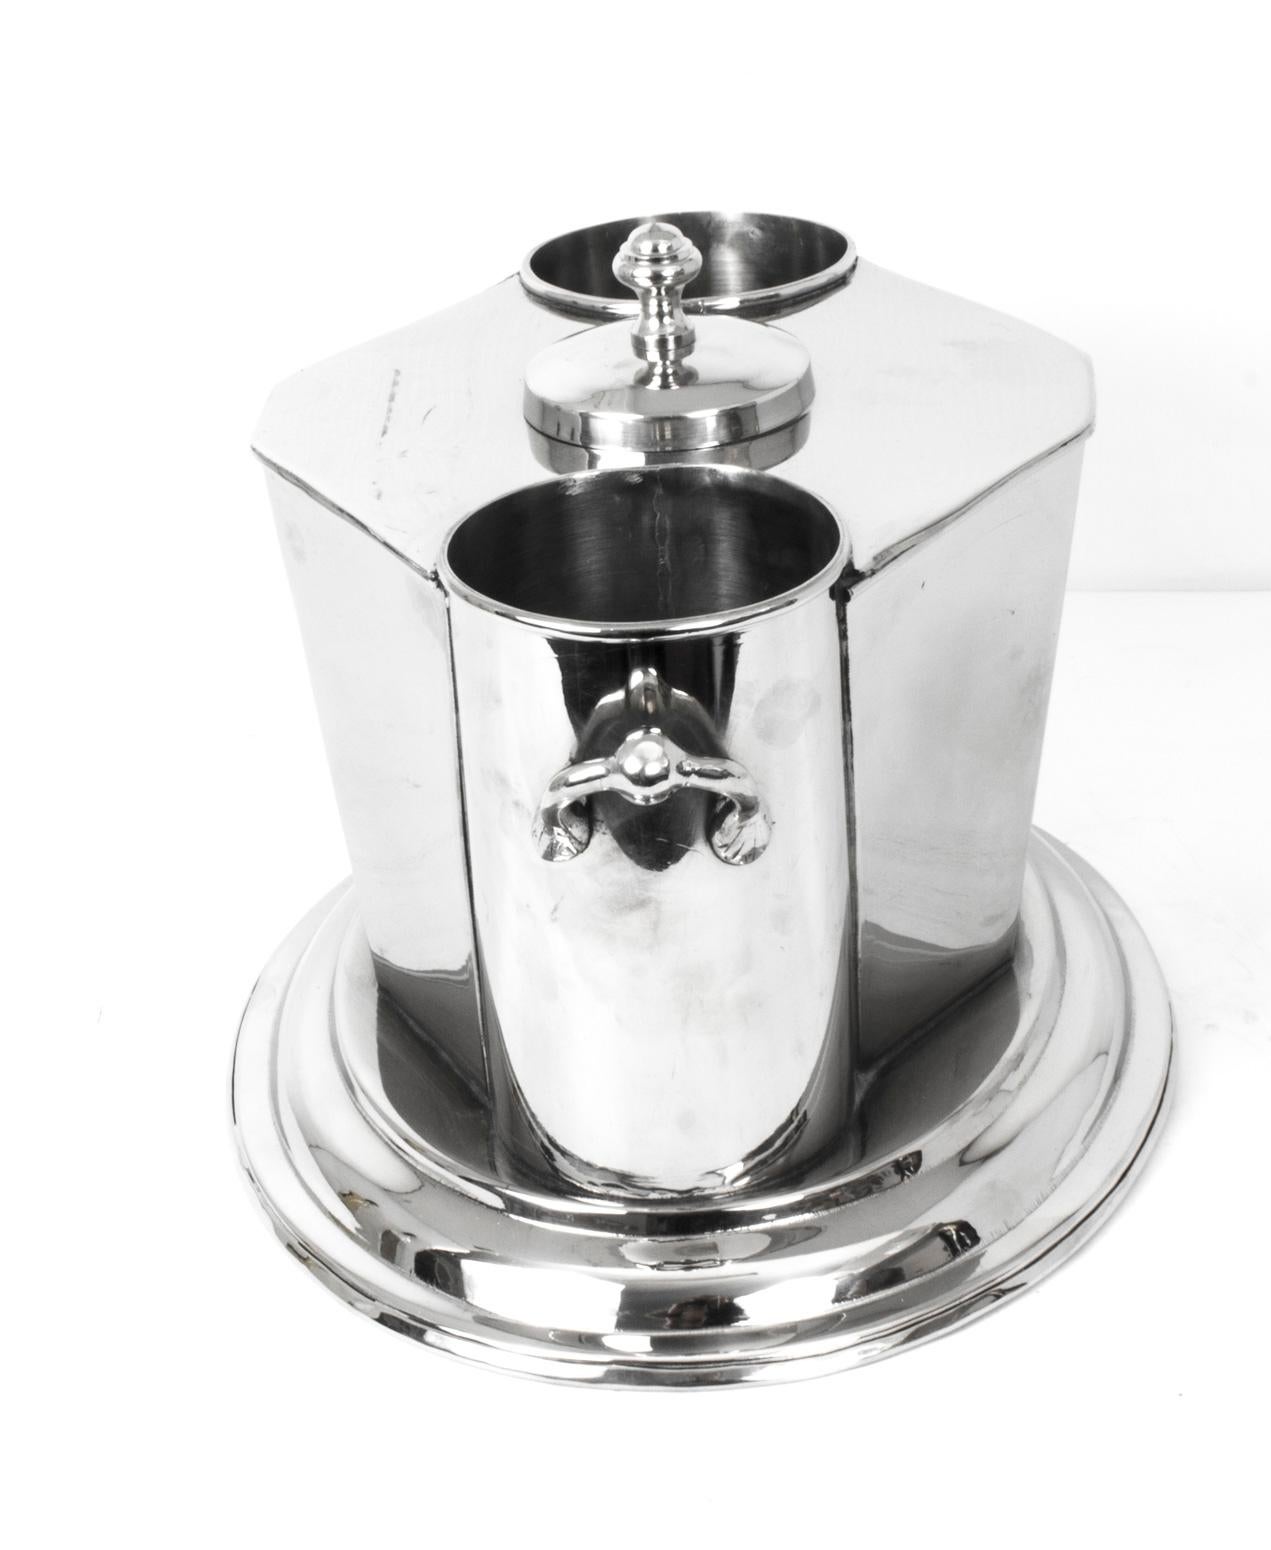 Vintage Silver Plated Art Deco Style Wine Cooler Ice Bucket 20th C 4